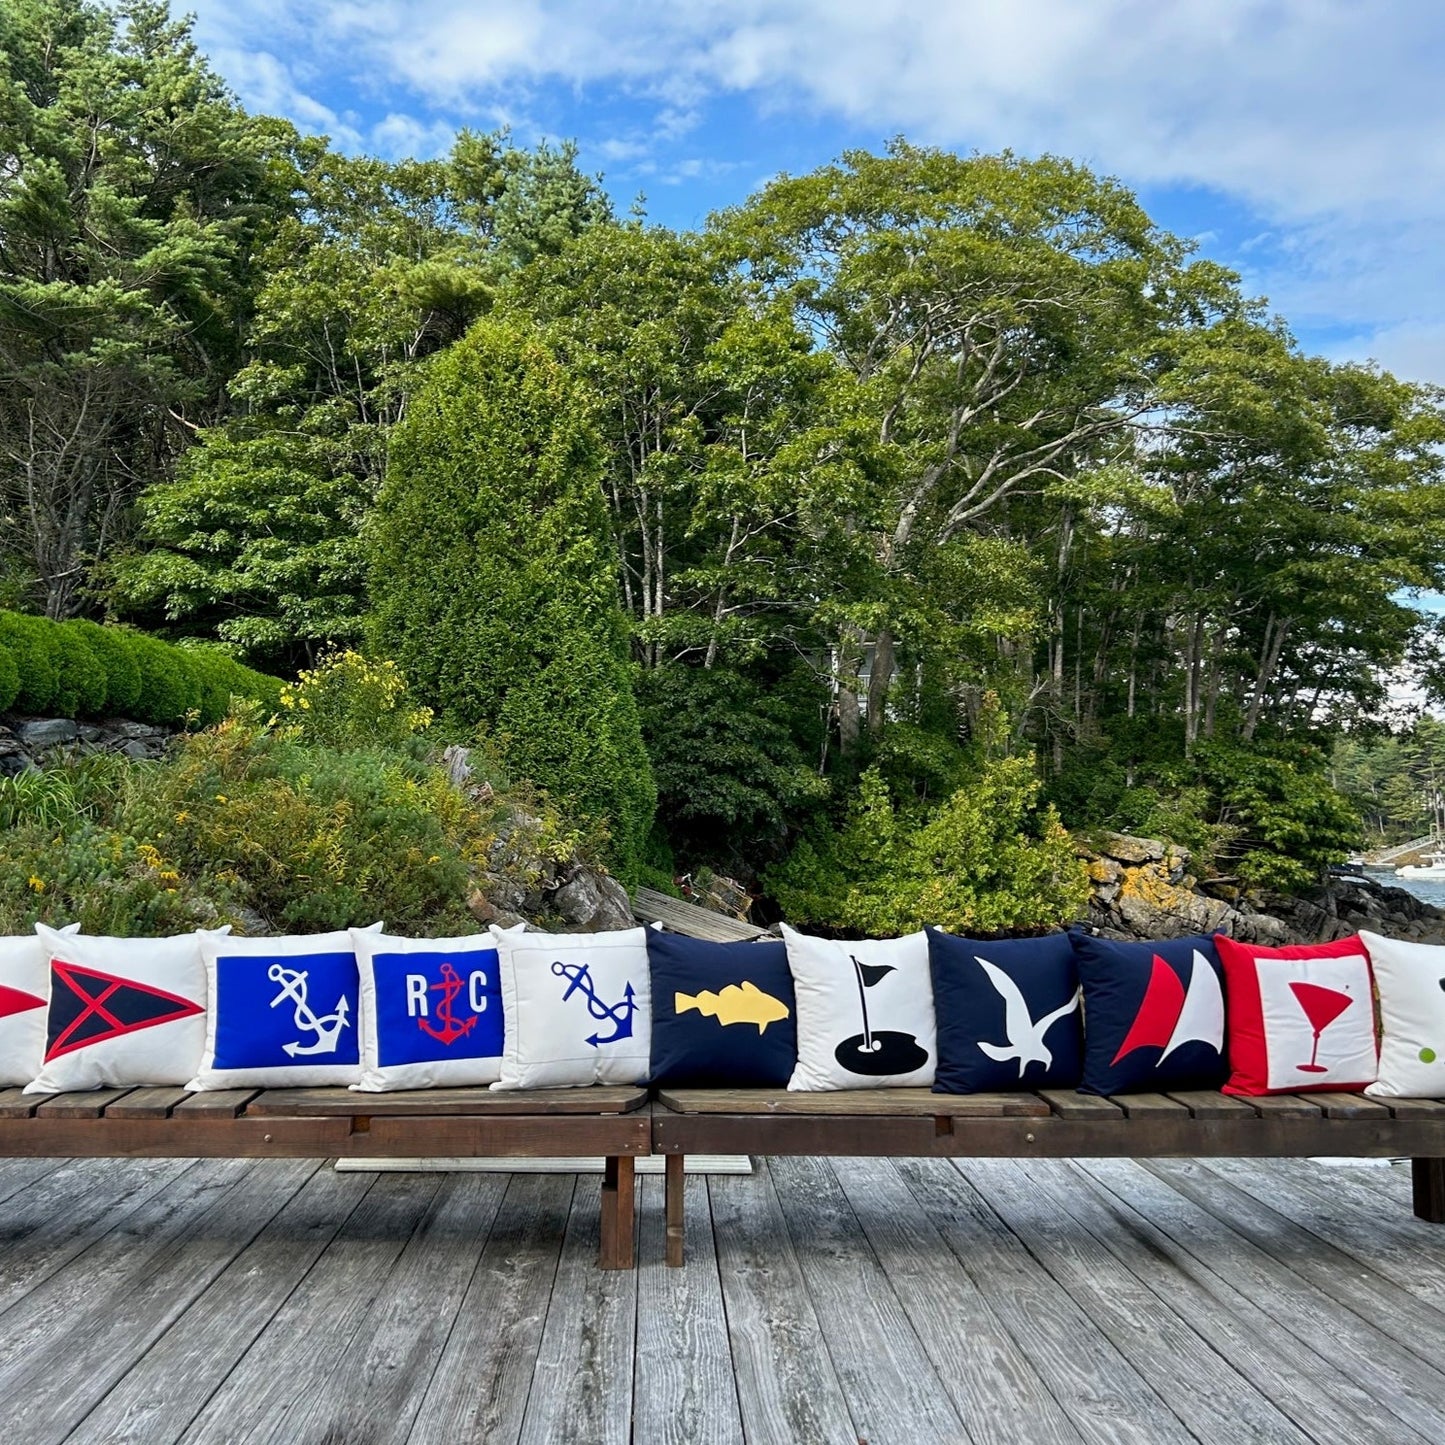 Eastern Point Yacht Club PIllow